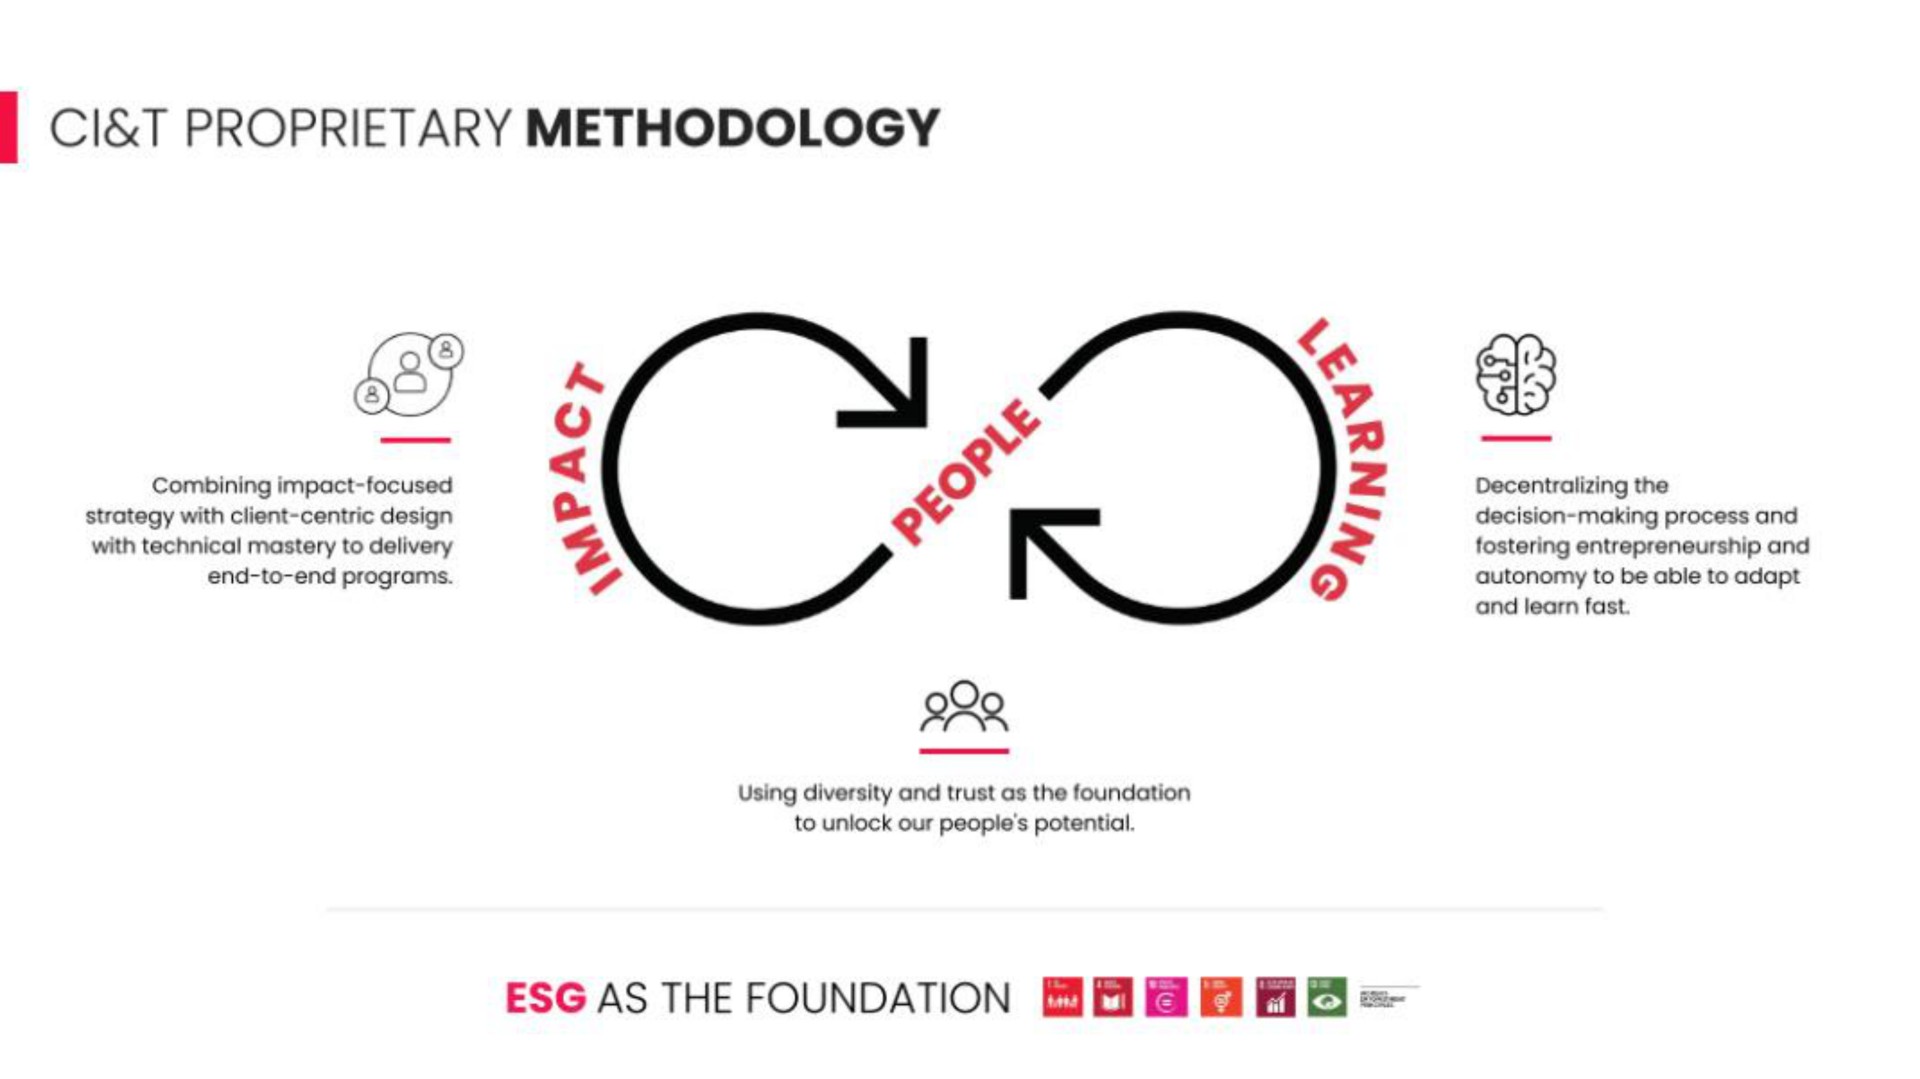 proprietary methodology a as the foundation | CI&T